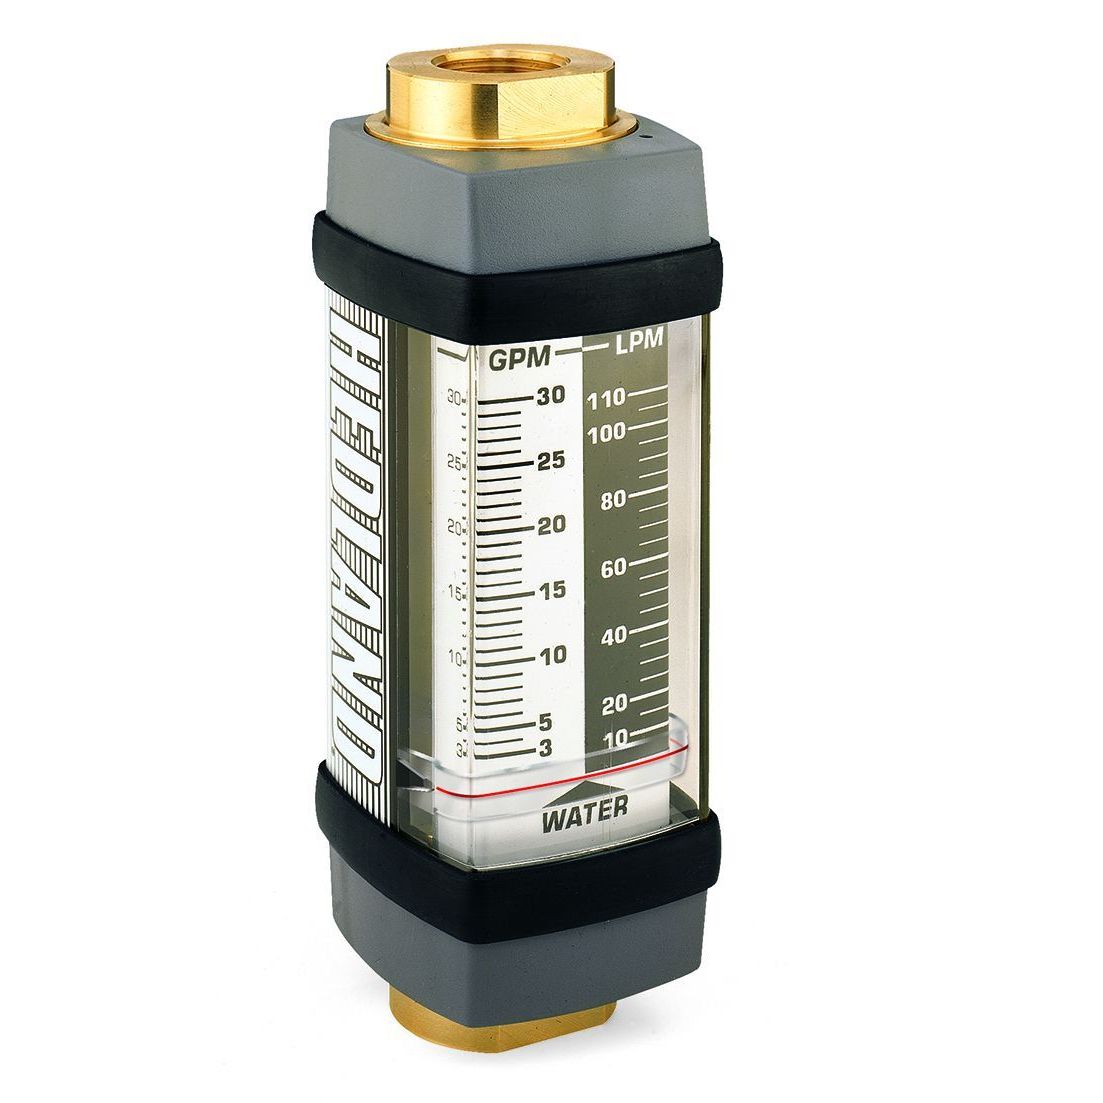 H205B-005 : Hedland 3500psi Brass Flow Meter for Water, 1/4 NPT, 0.05 to 0.5 GPM